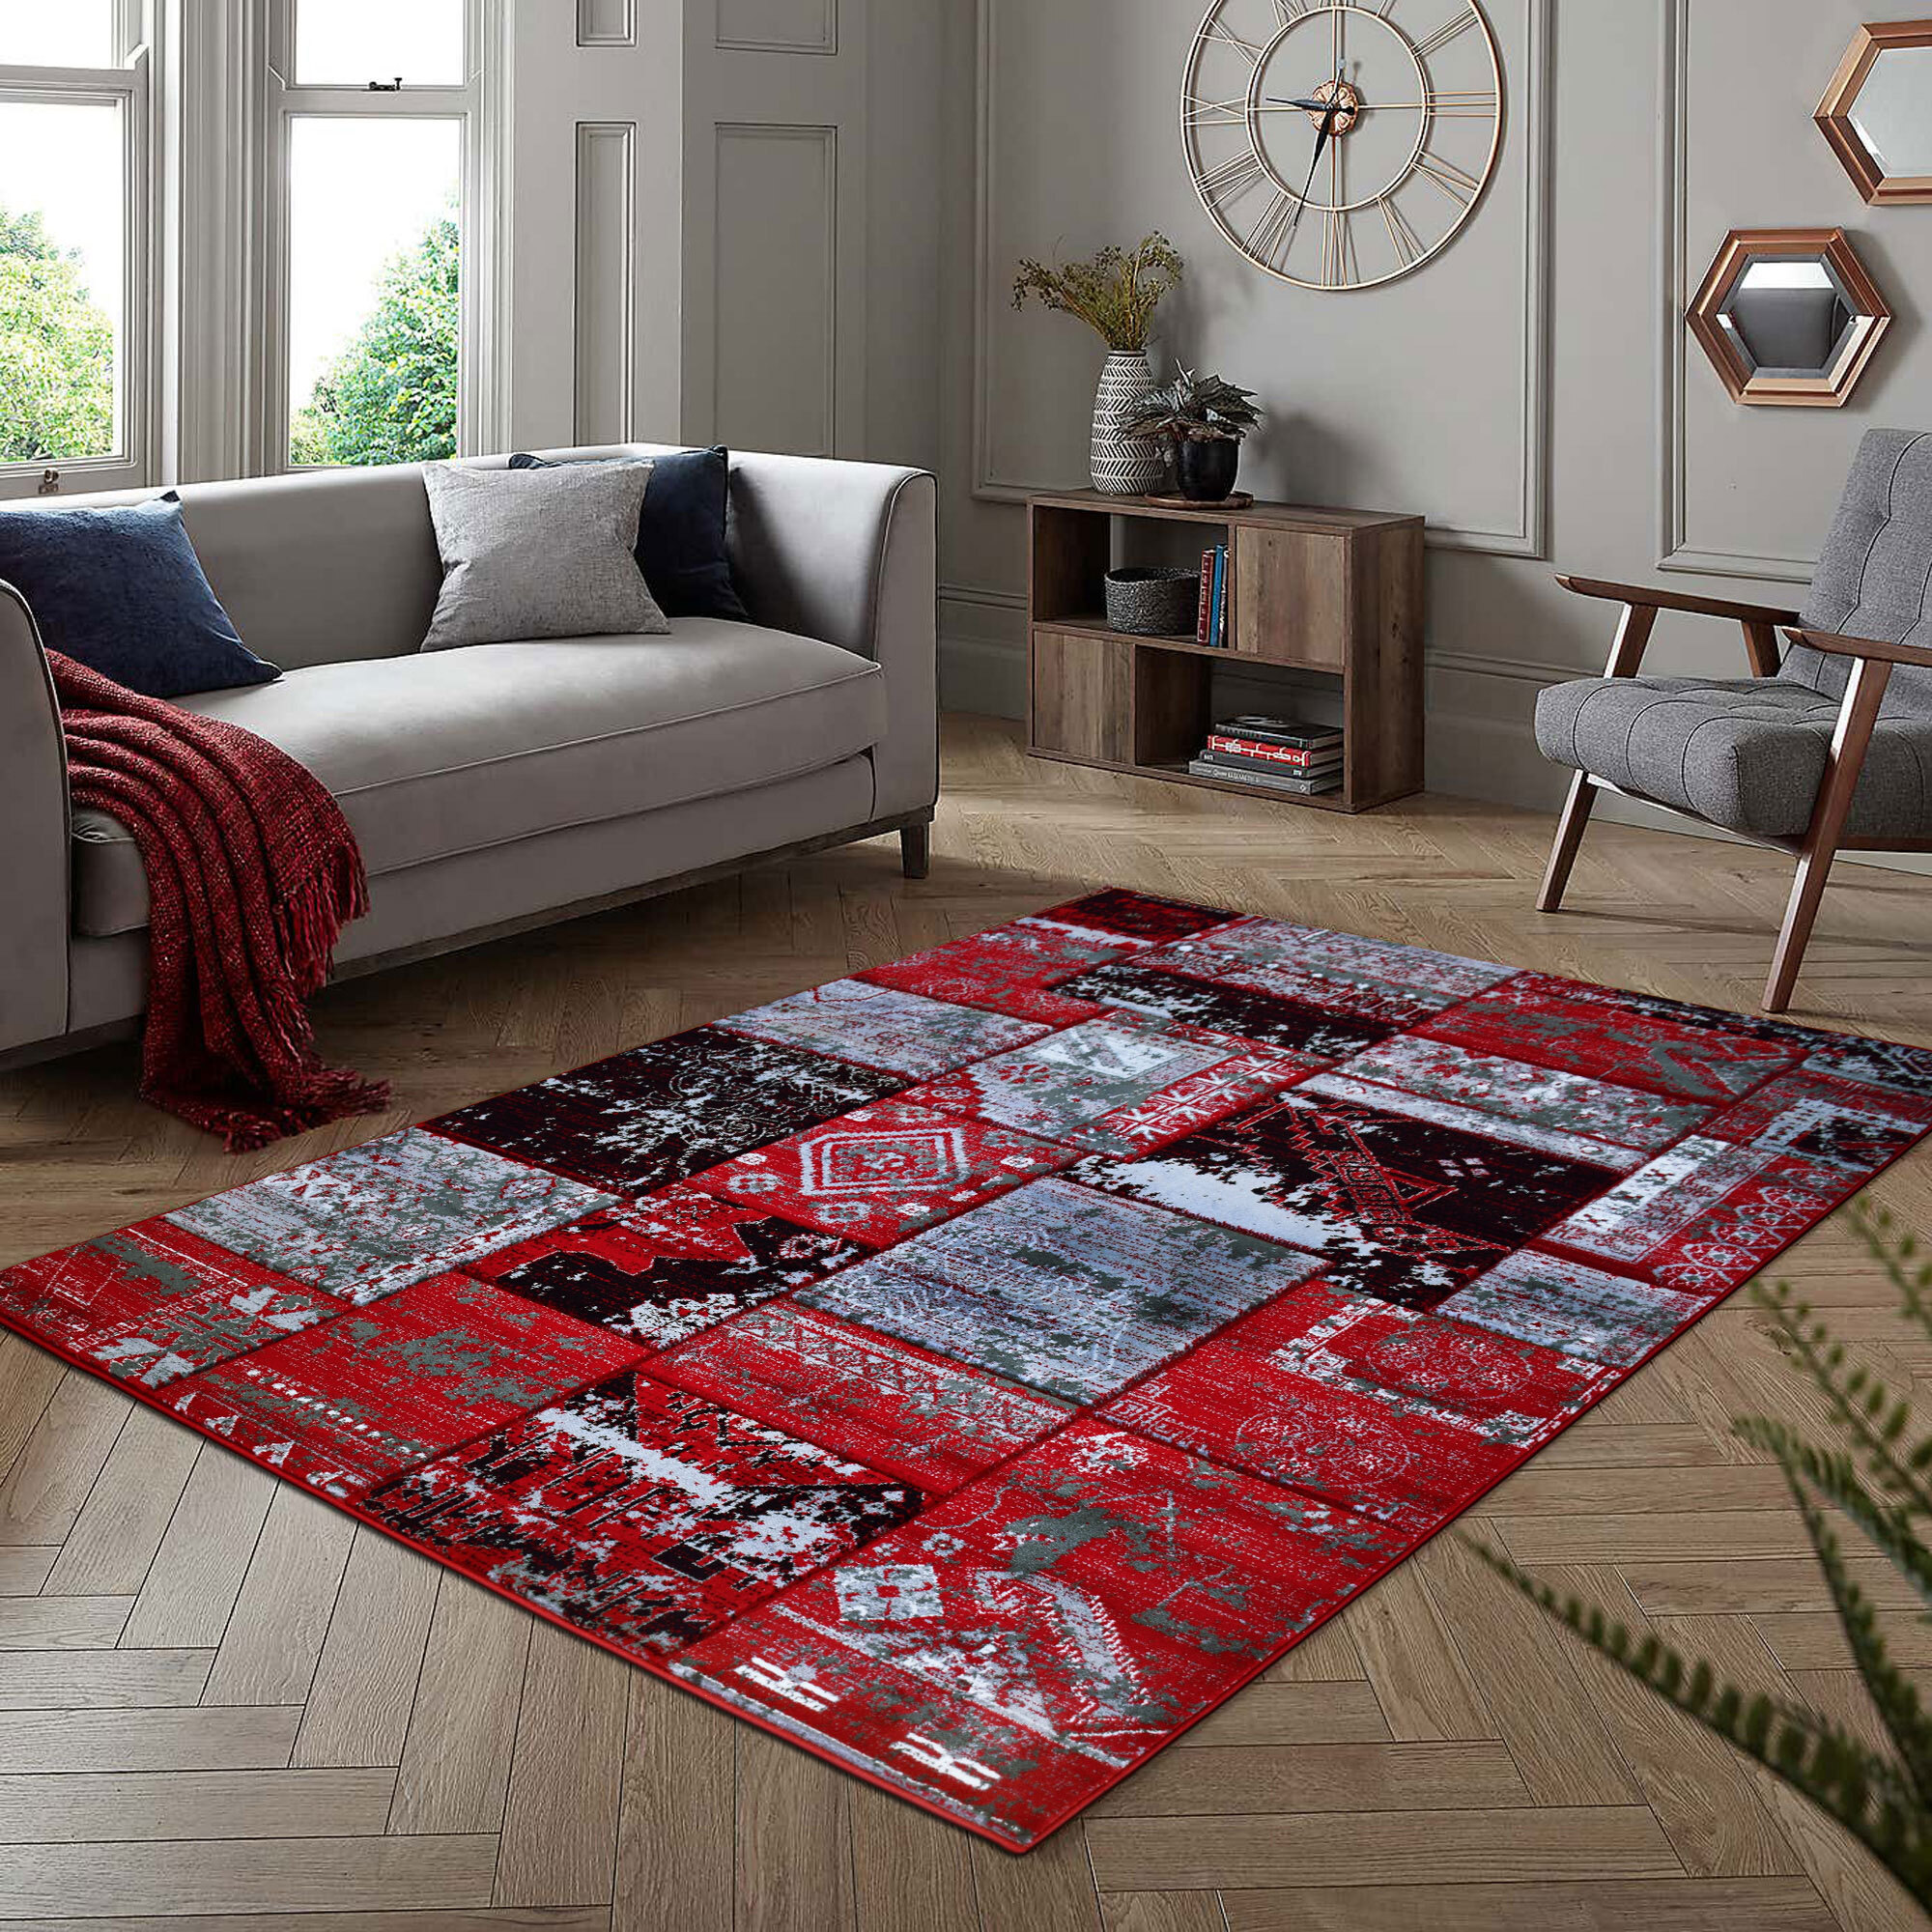 Red living room rug